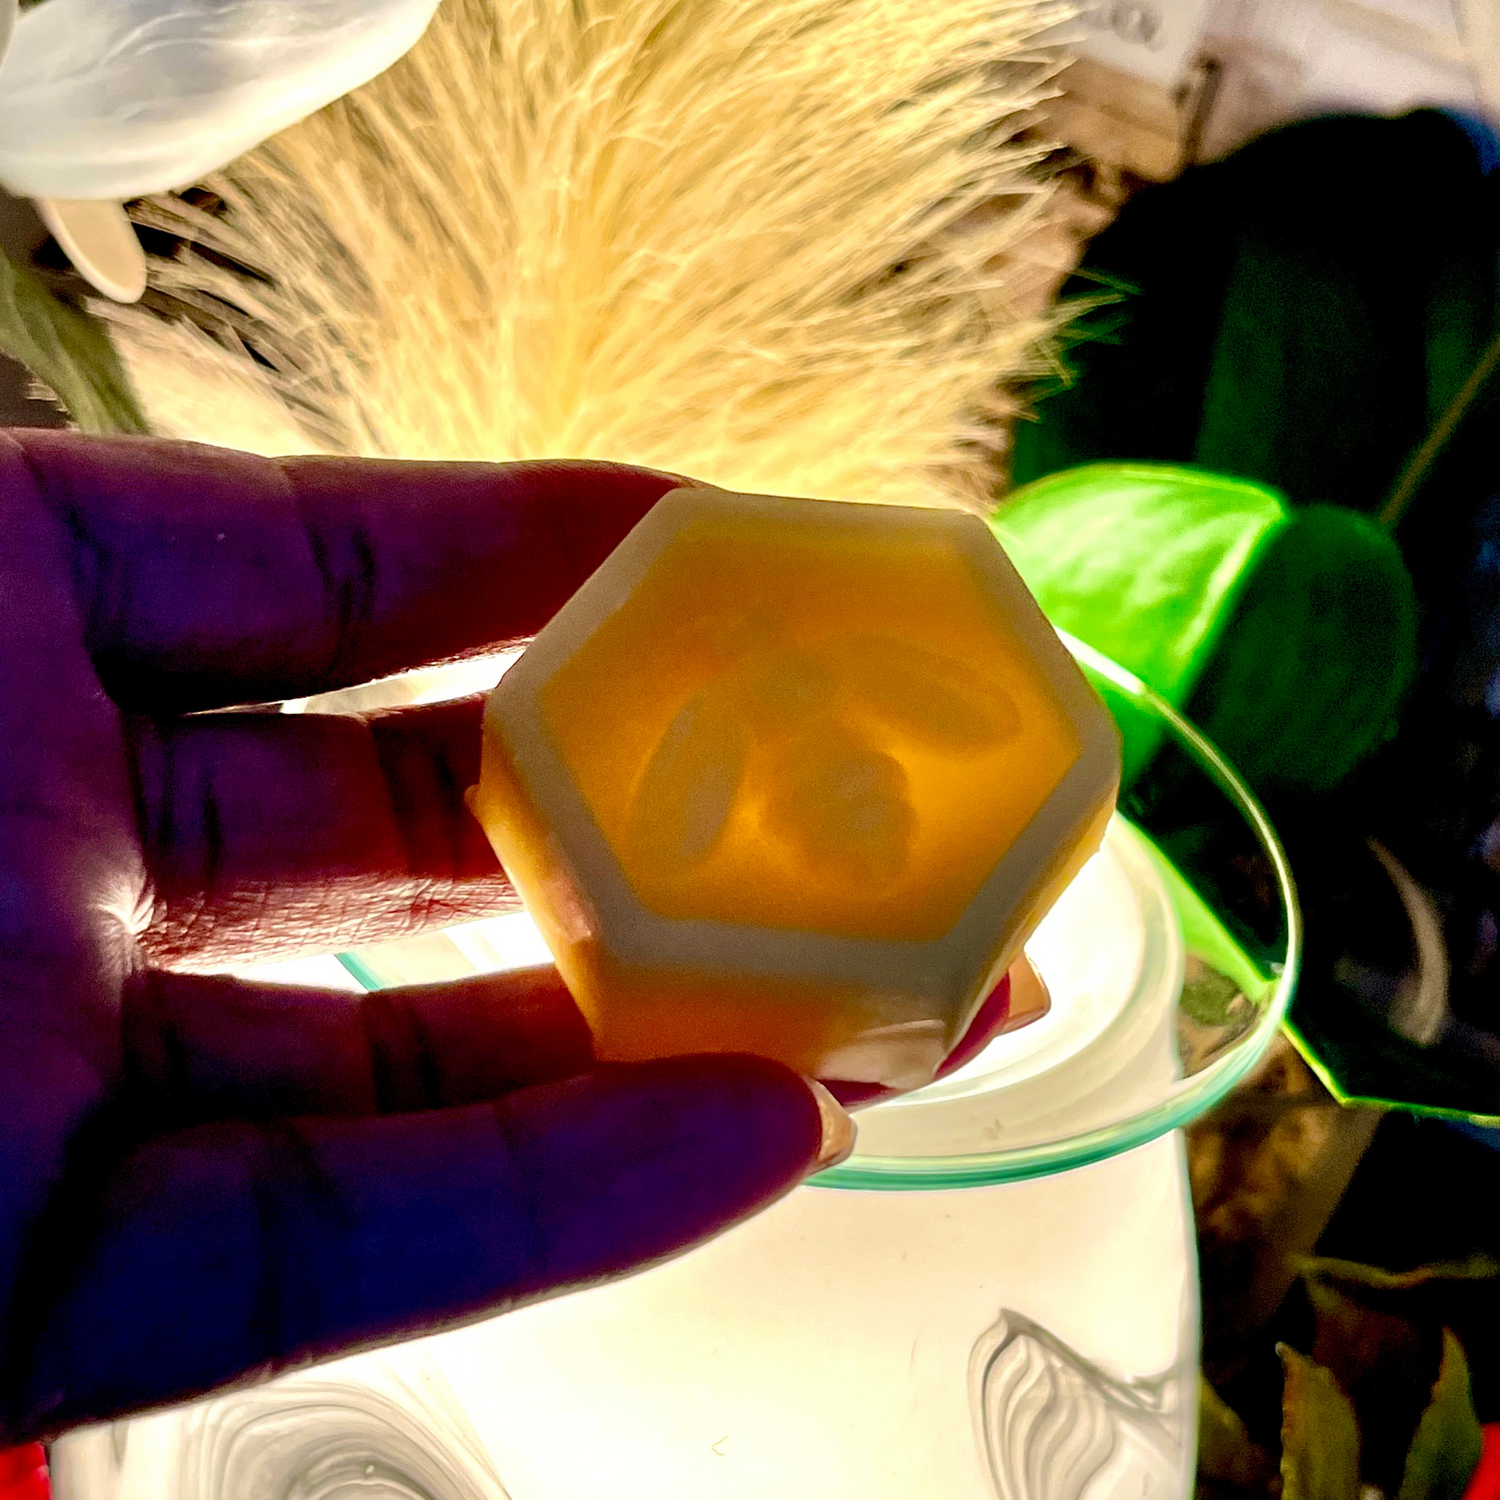 Alchemy7 | Apian - Wax Melts for Aromatherapy and Home Fragrance - Beeswax Melts